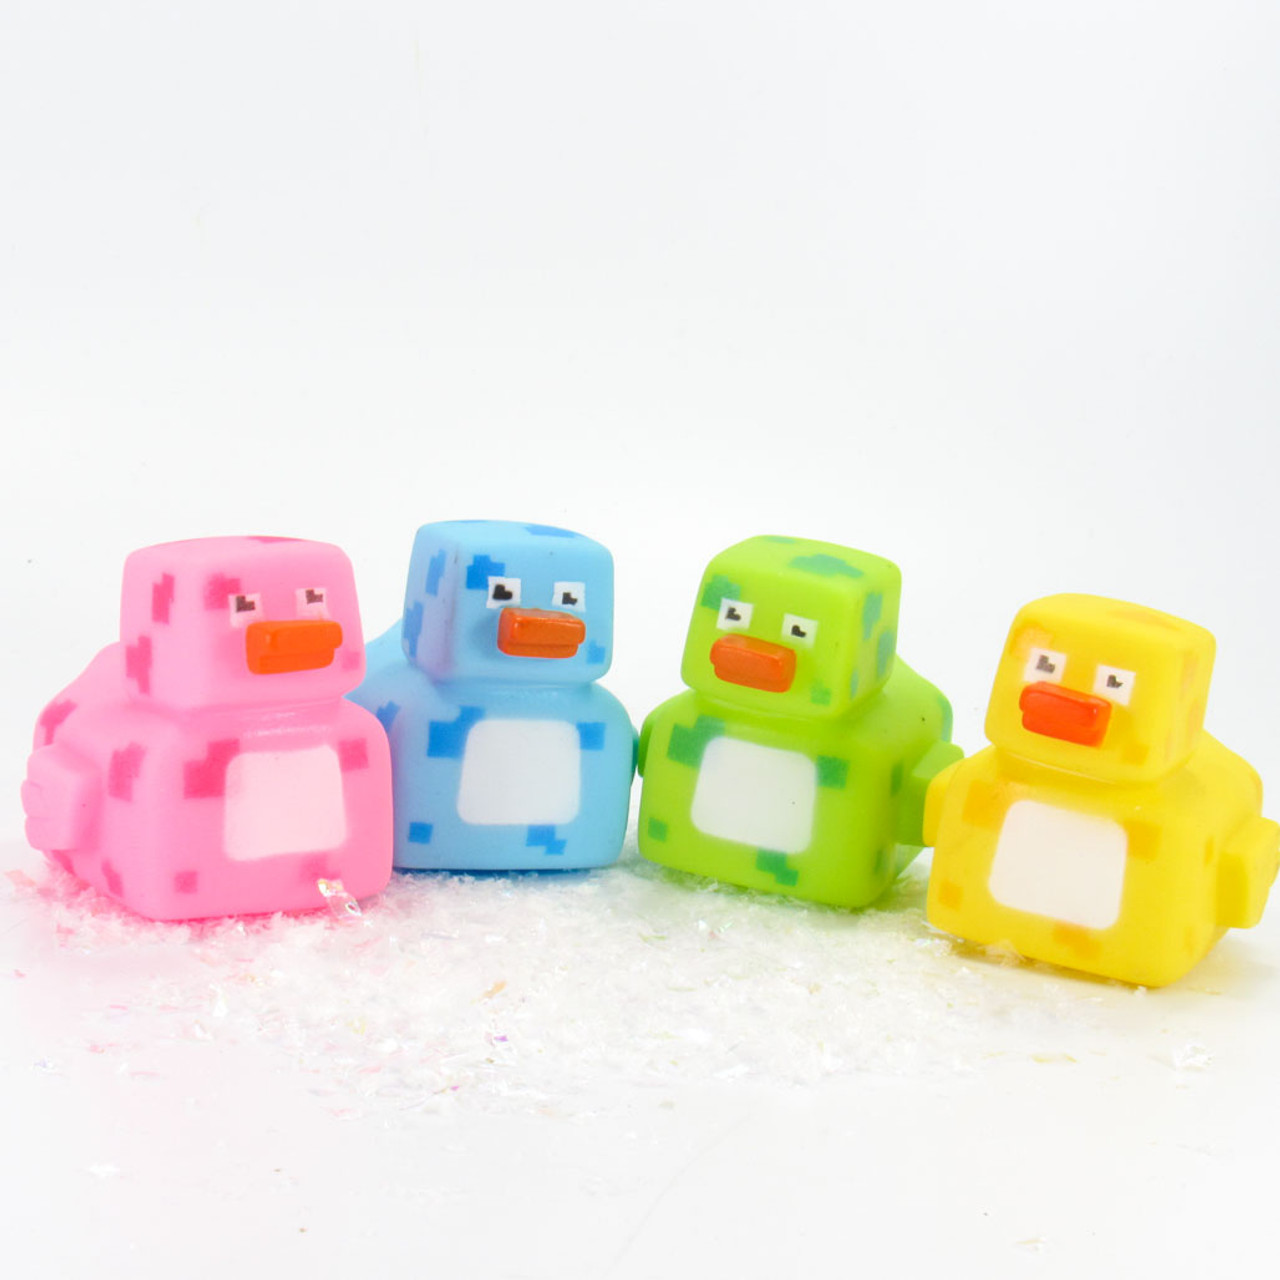 STRETCHY RUBBER DUCK by KEYCRAFT